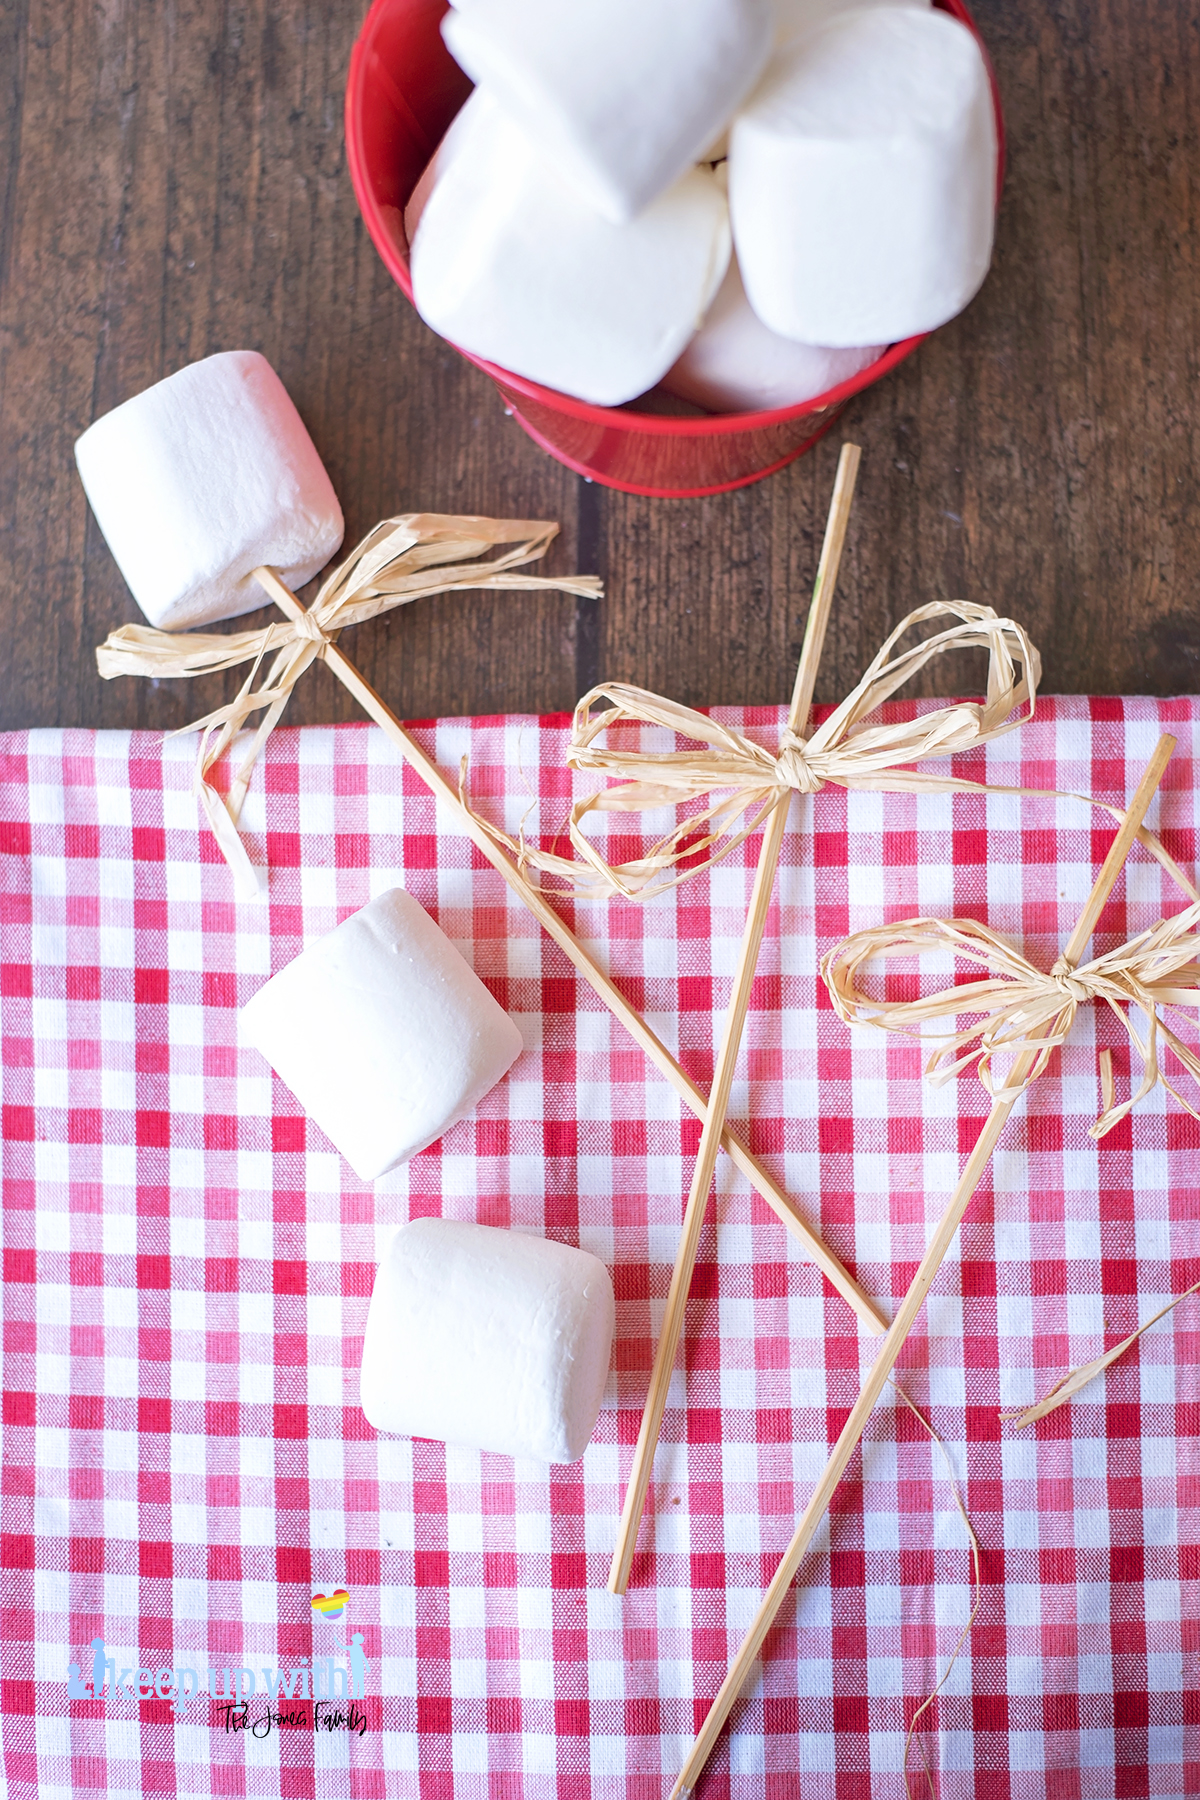 Image shows a dark wooden tabletop covered partially by a red and white checked tablecloth. On the tabletop is a large red tin bucket filled with large marshmallows and several wooden sticks tied with raffia bows, ready to have marshmallows skewered on to them to make Teddy Bear S'More Pops. Image by keep up with the jones family.